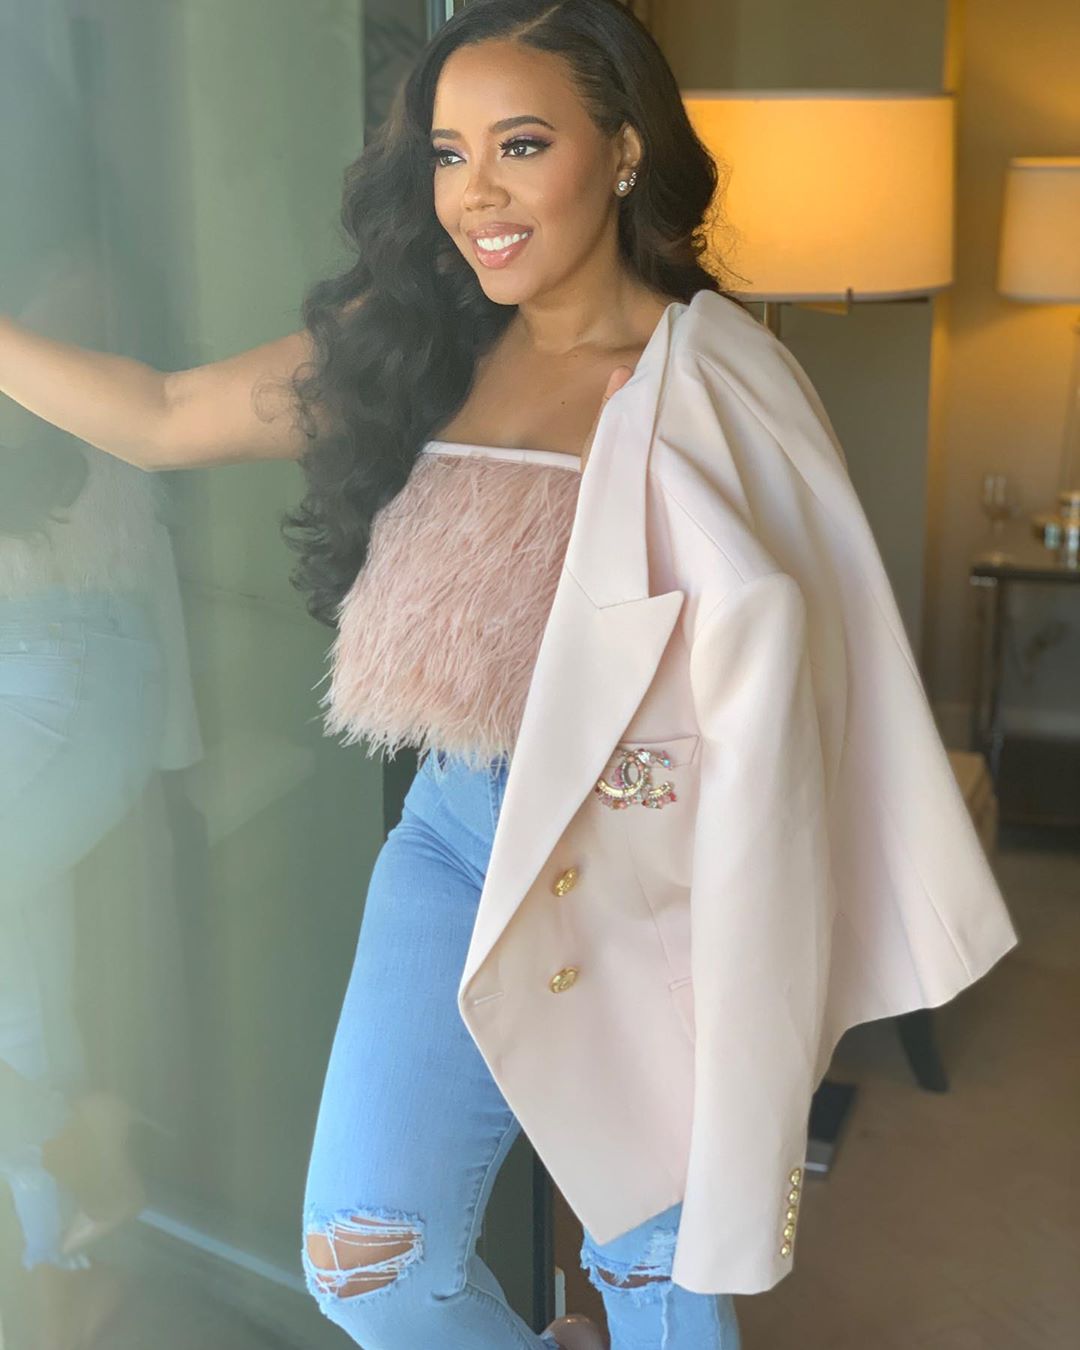 'Adorably Sexy' Angela Simmons' Fashion Pic Sends Fans Swooning